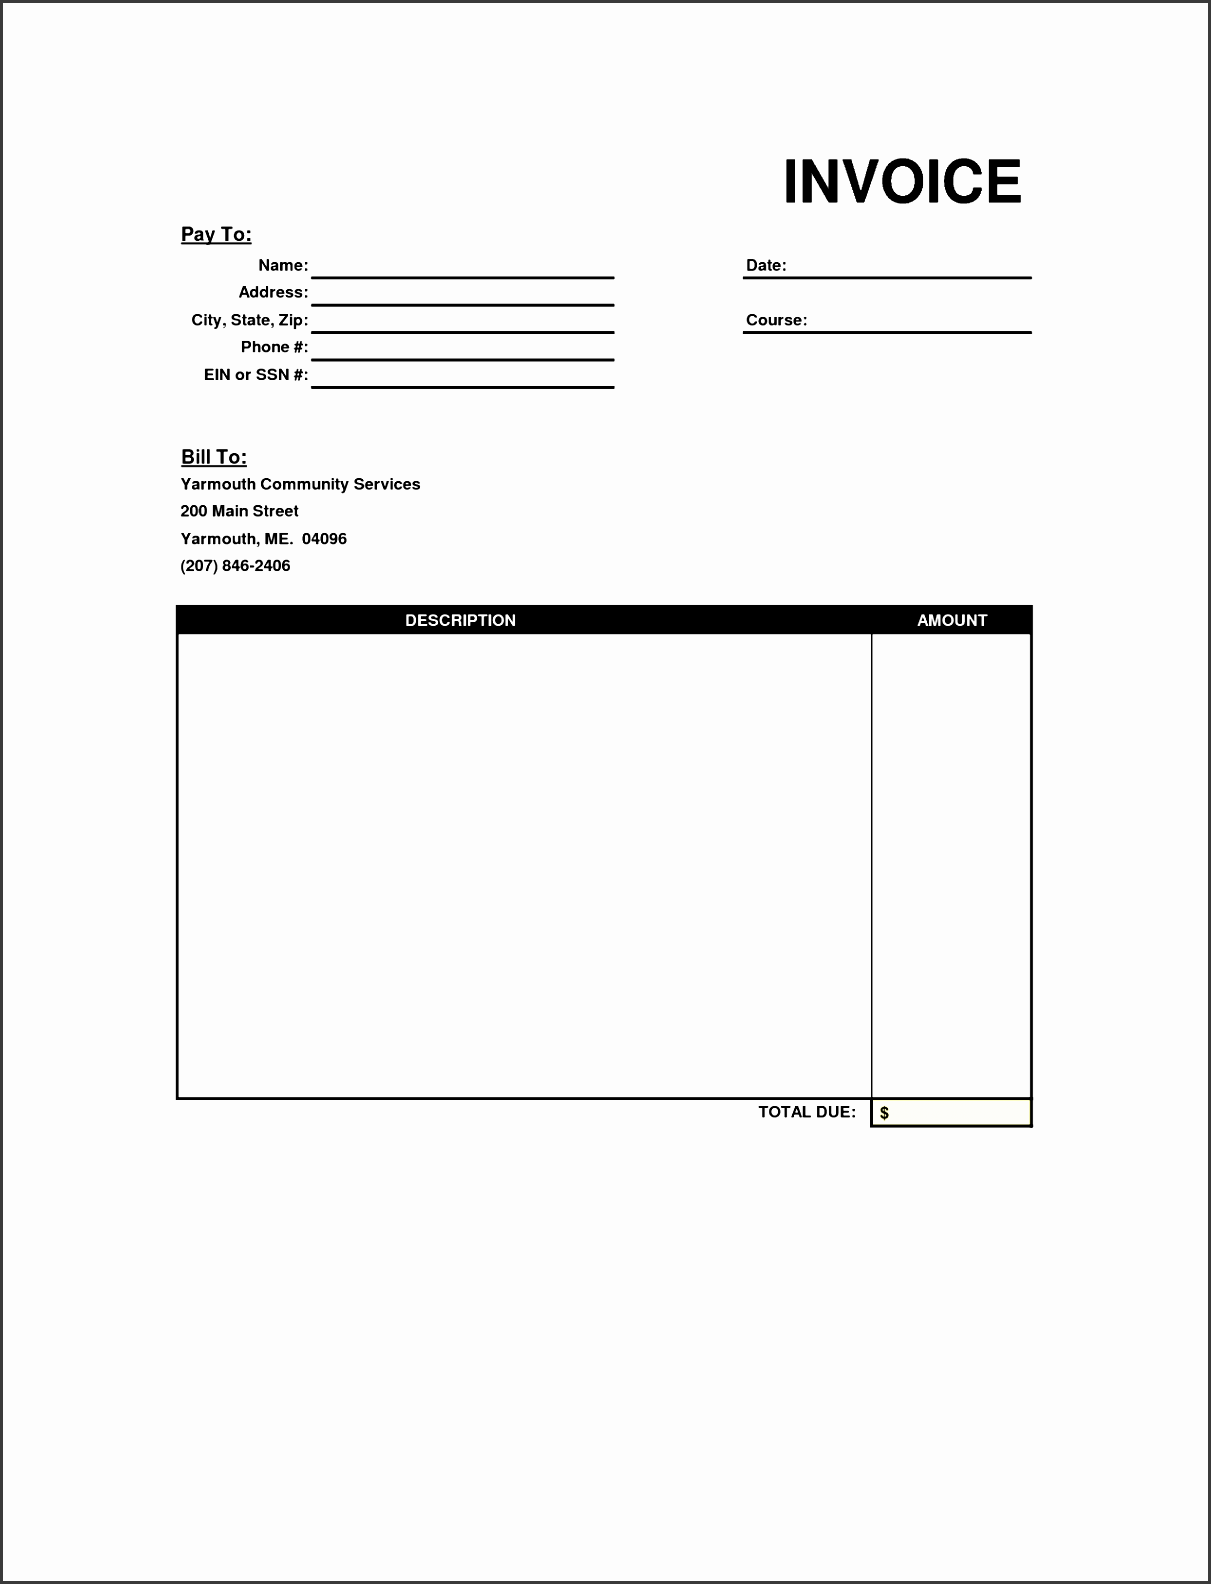 copy-of-a-blank-invoice-invoice-template-free-2016-copy-of-blank-free